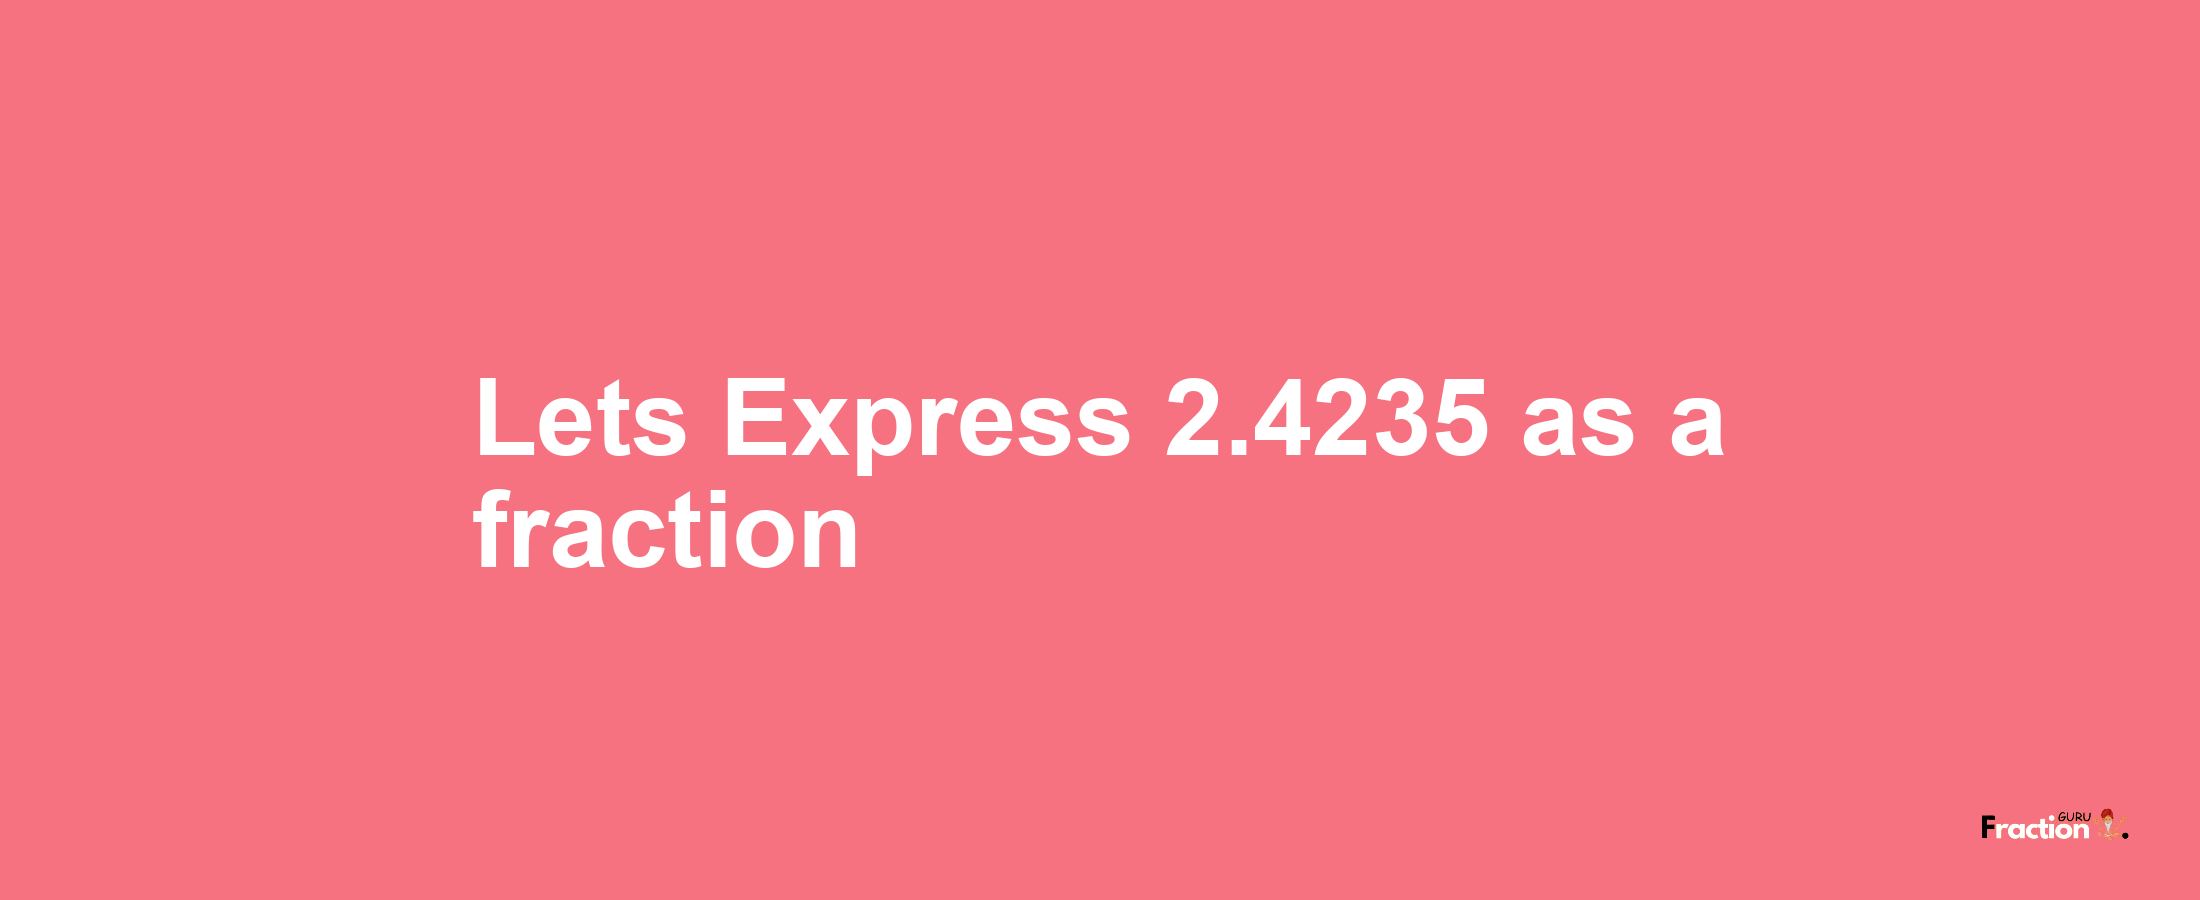 Lets Express 2.4235 as afraction